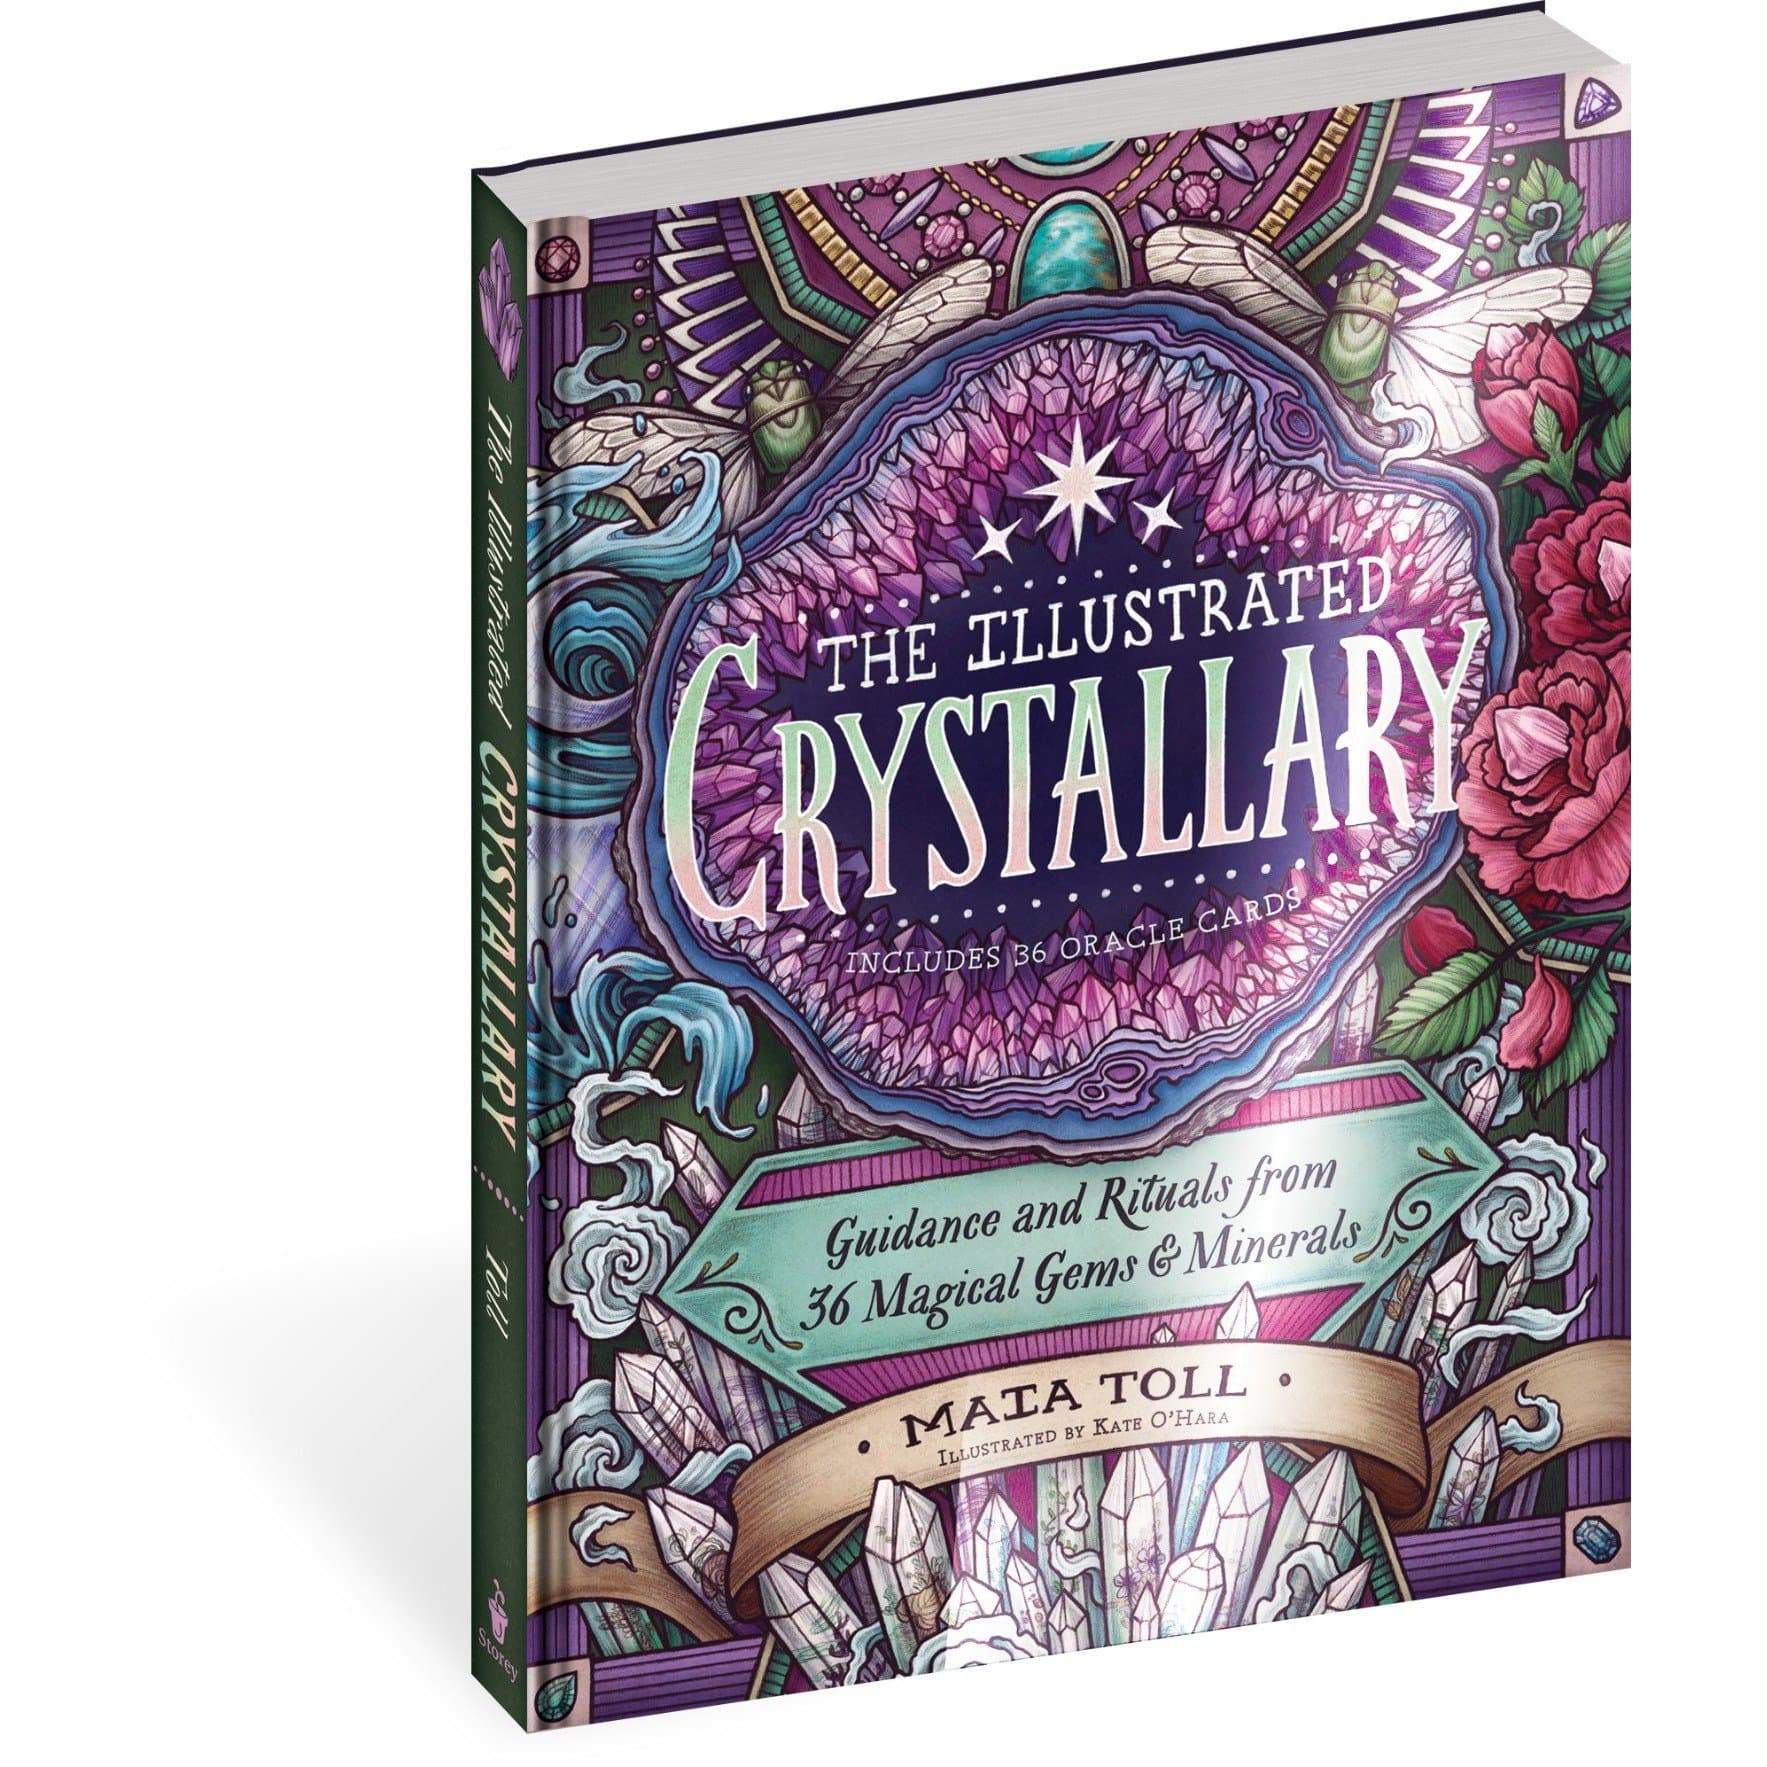 The Illustrated Crystallary Workman Publishing Co. Books